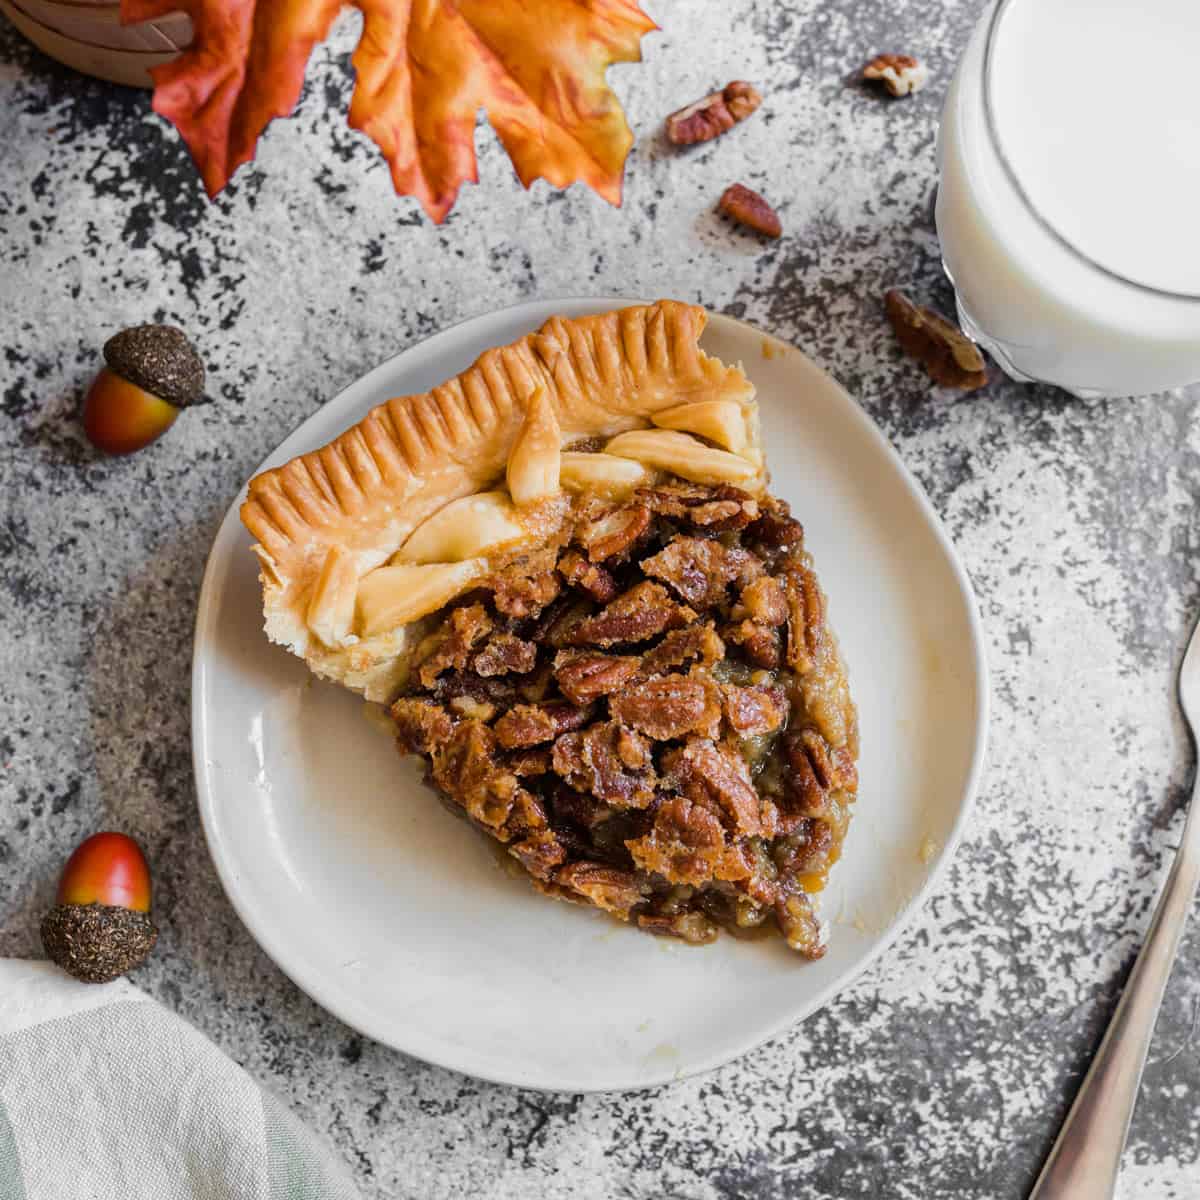 A slice of homemade pecan pie on a plate.